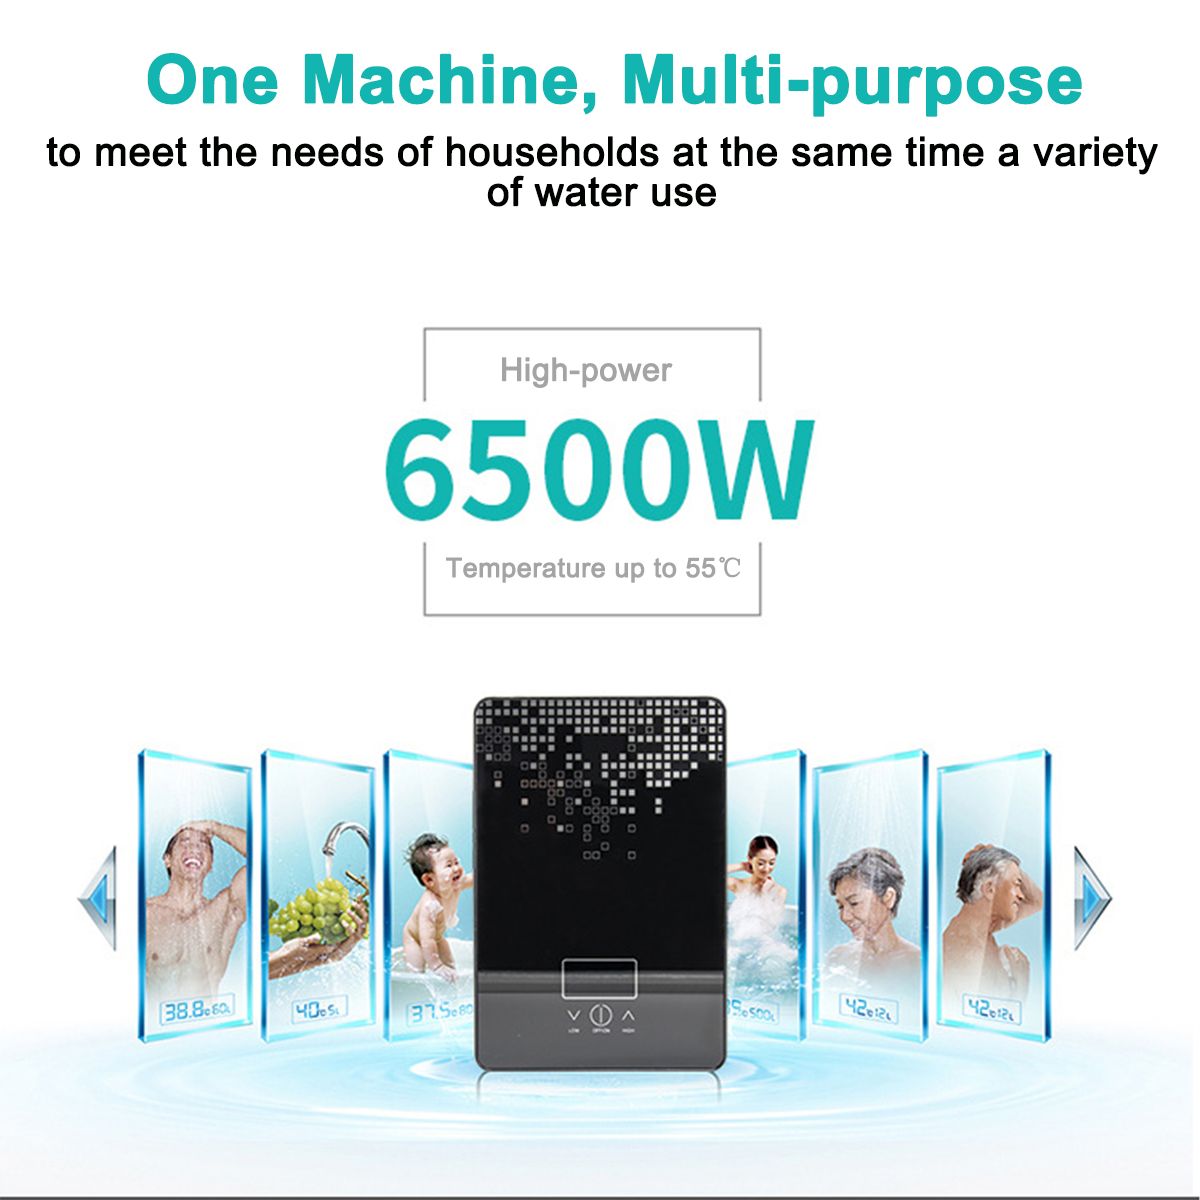 6500W-220V-Mini-Electric-Water-Heater-Instant-Tankless-Shower-Kitchen-Faucet-1588538